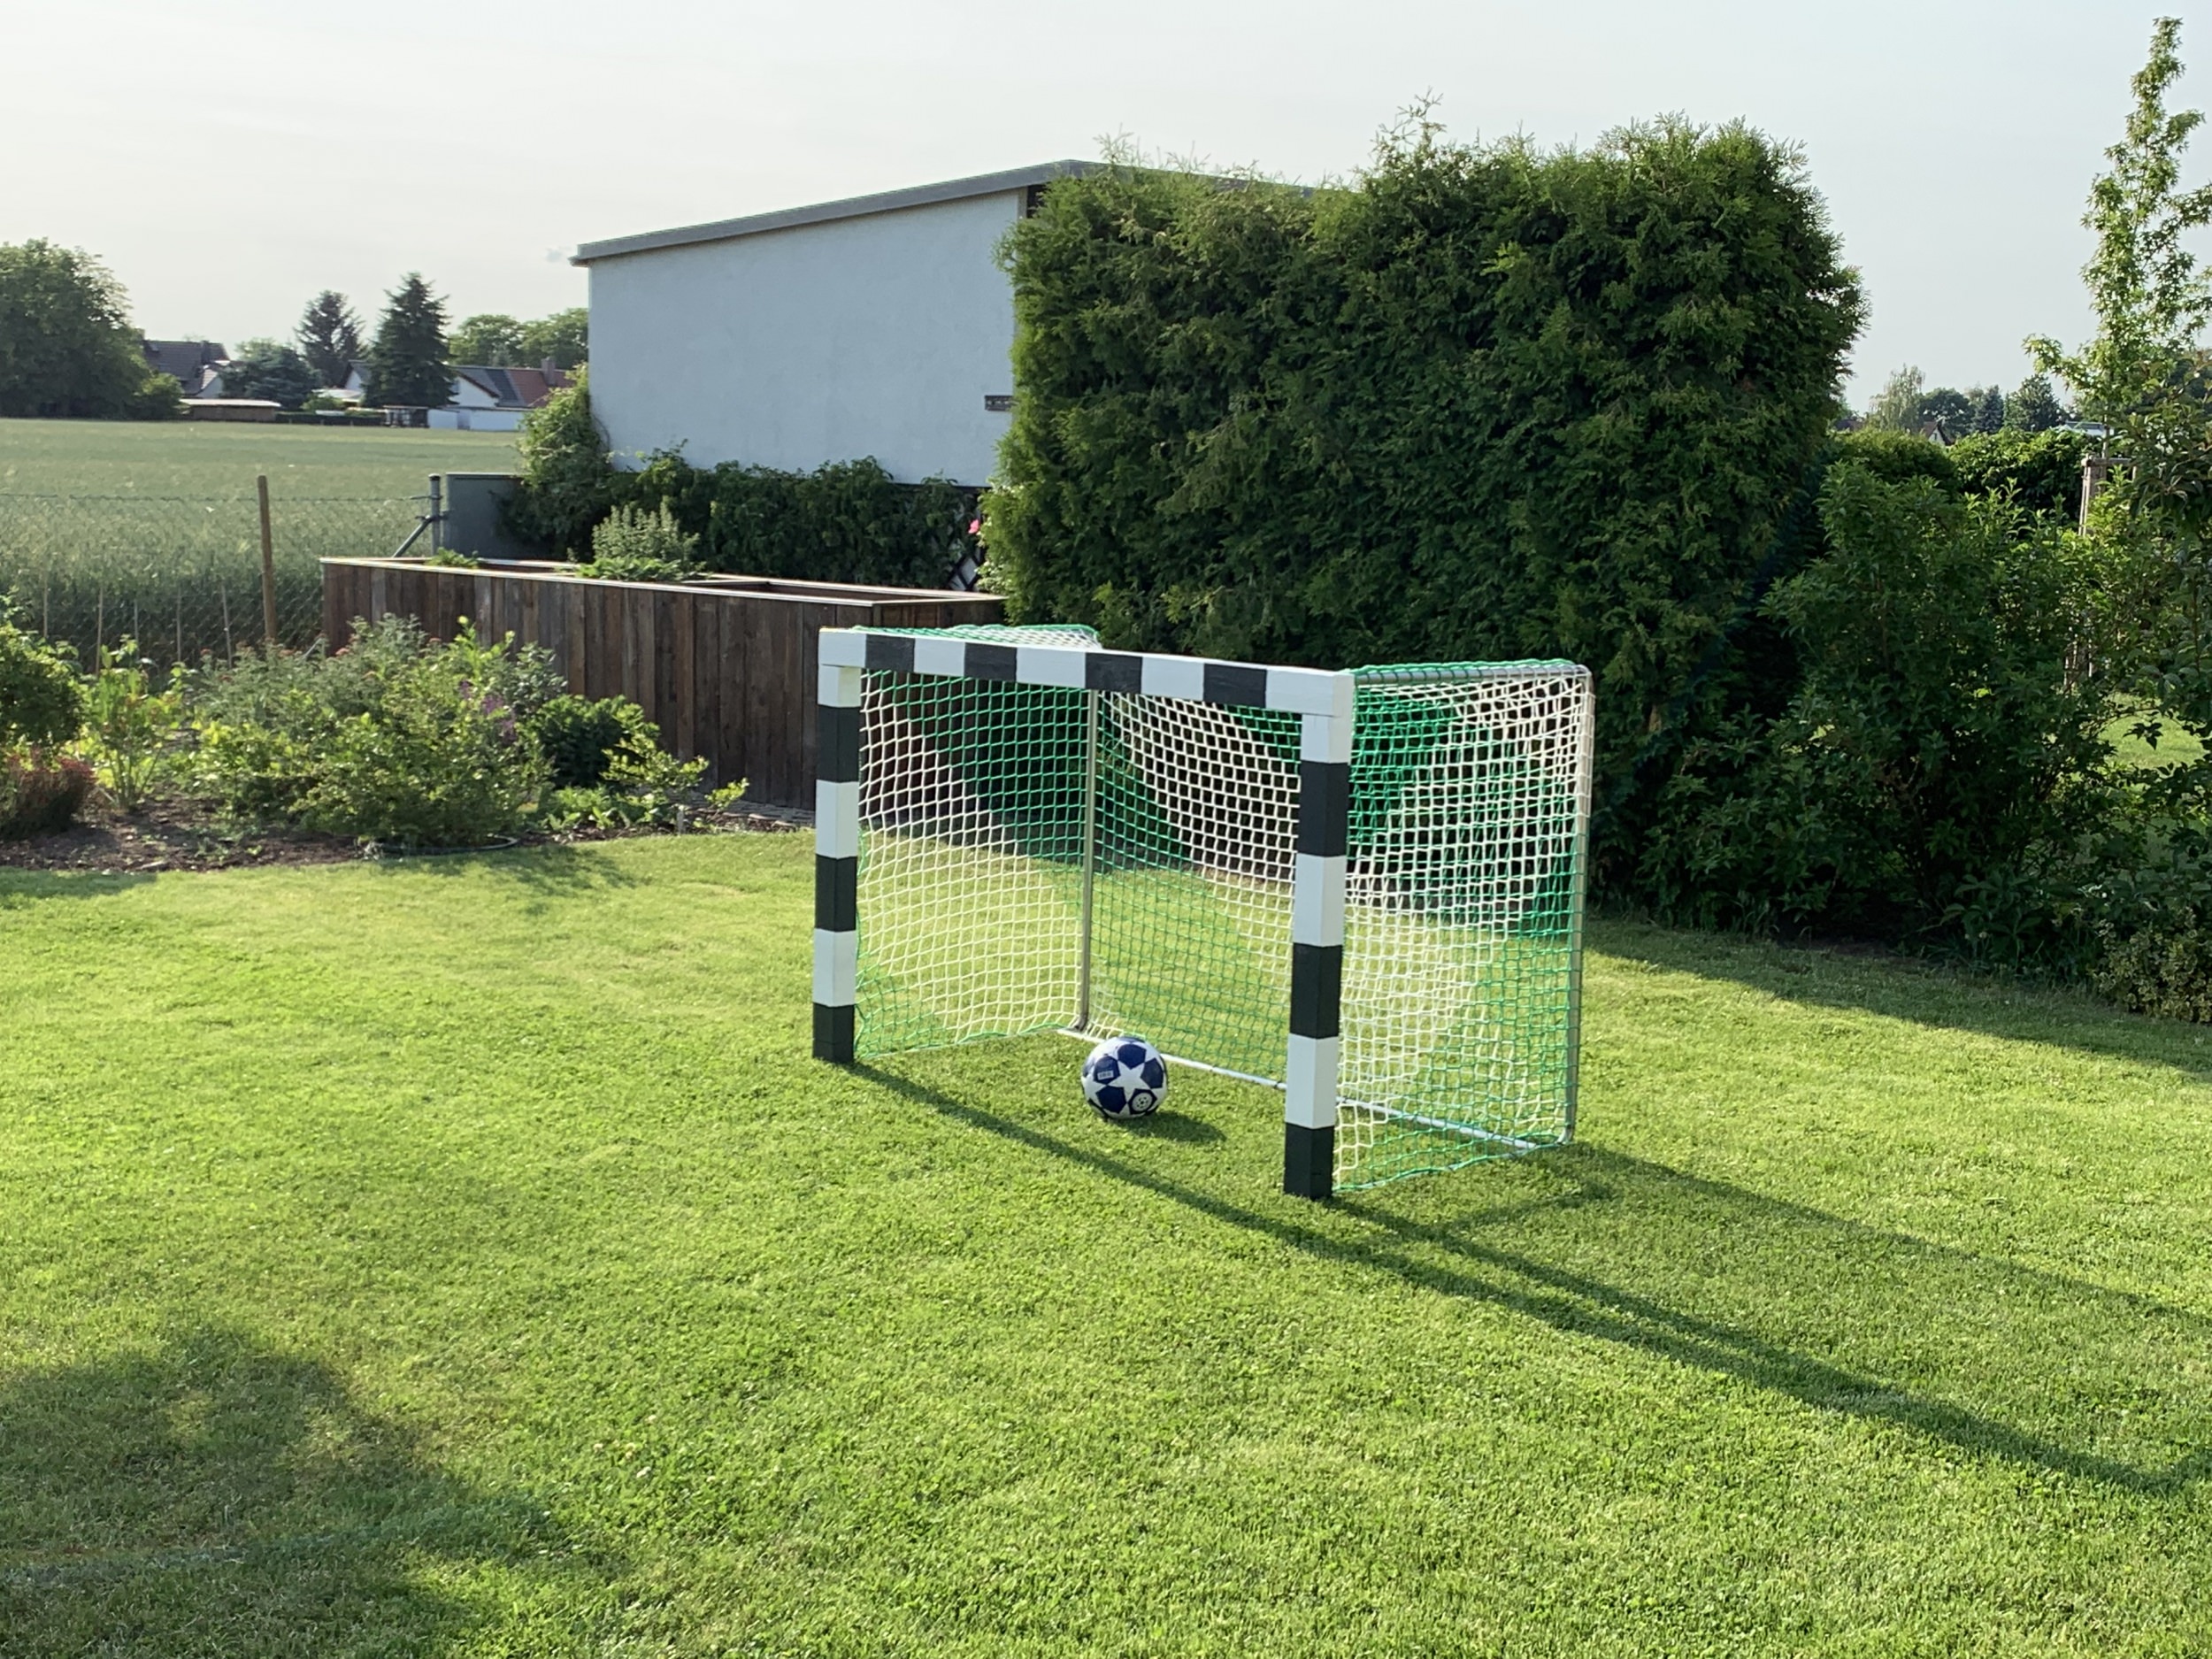 Stadium Soccer Goal Nets - Pair [11x Striped & Colored Options]